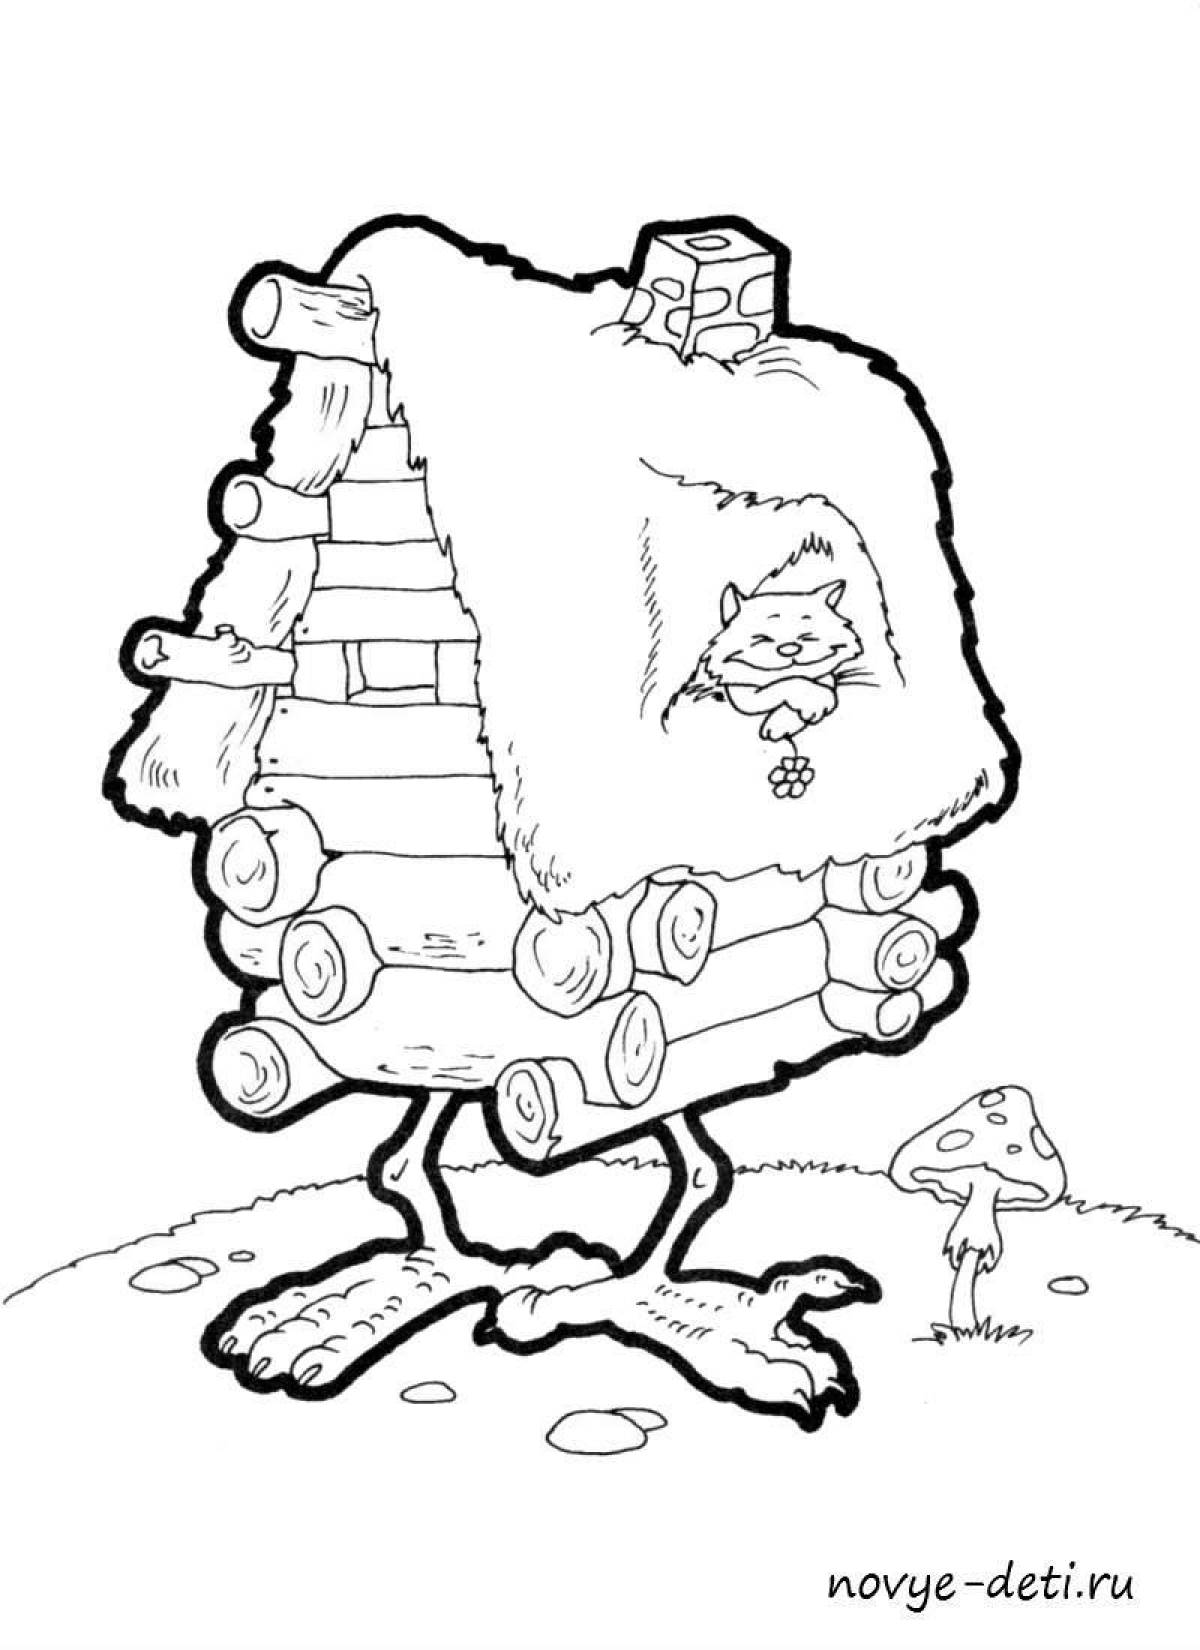 Exotic hut coloring page